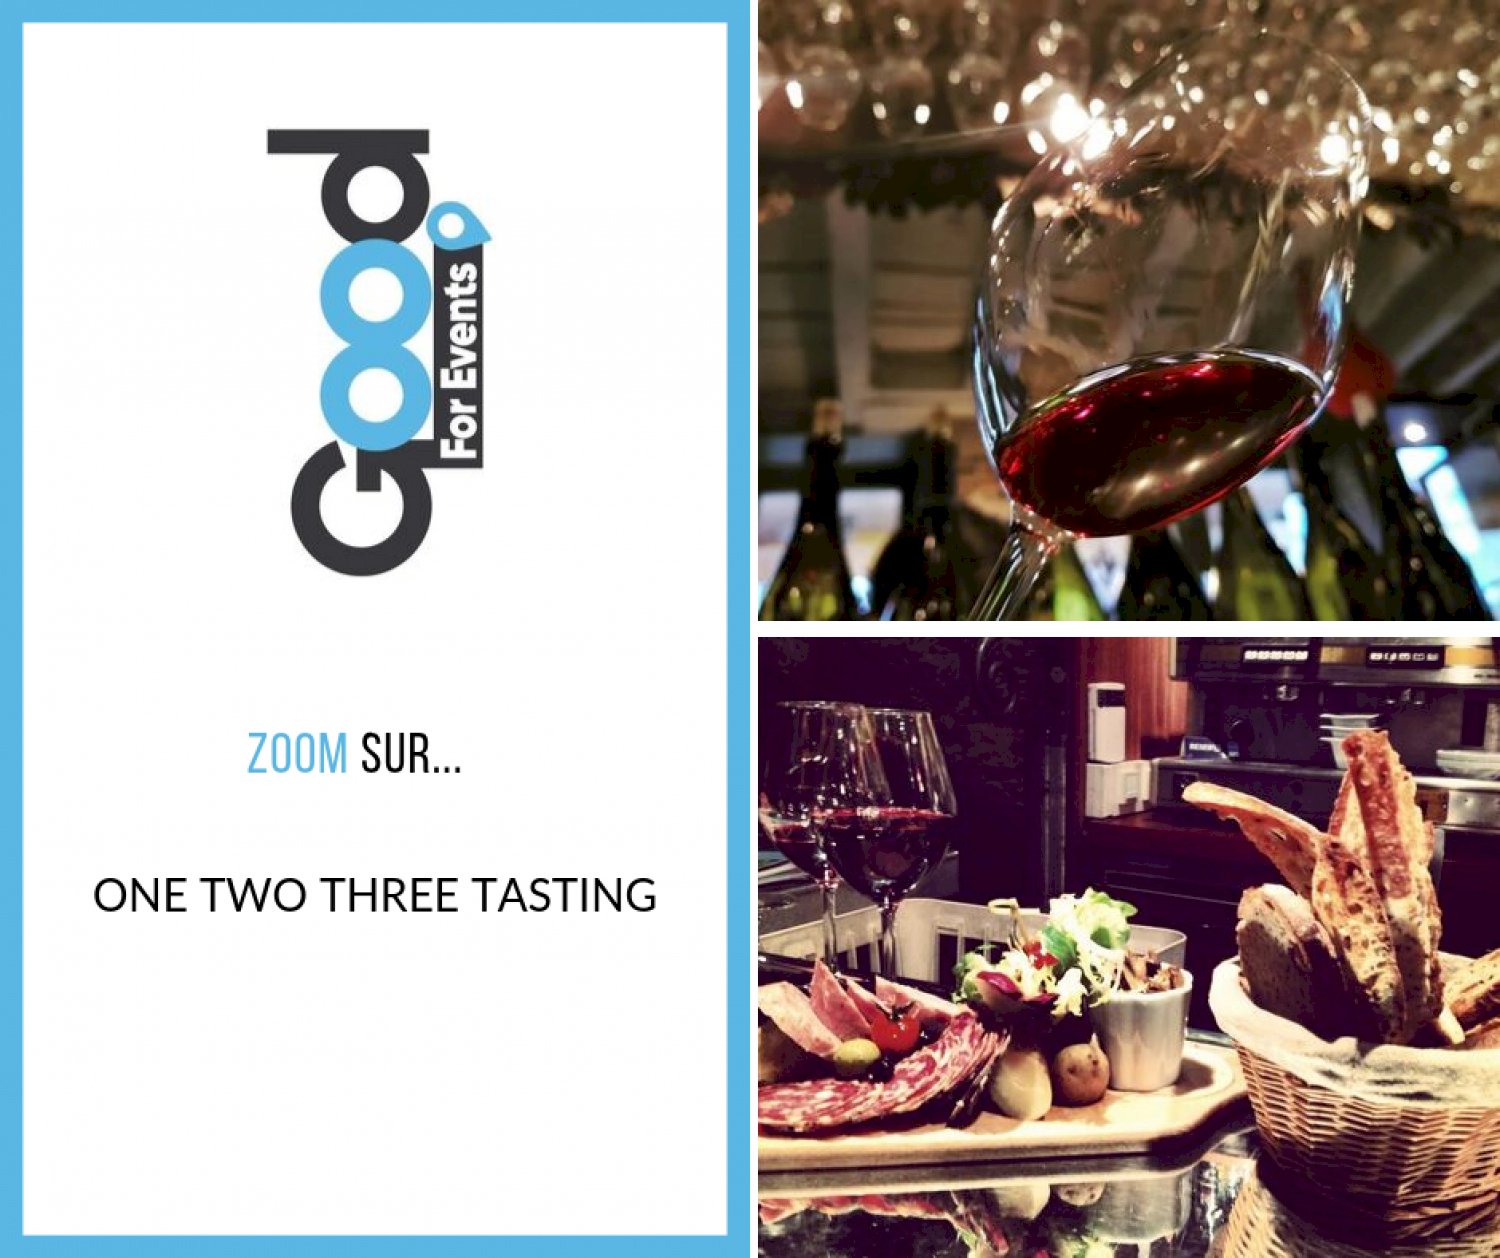 article good for events - Bref I Vin BIO One Two Tree Tasting